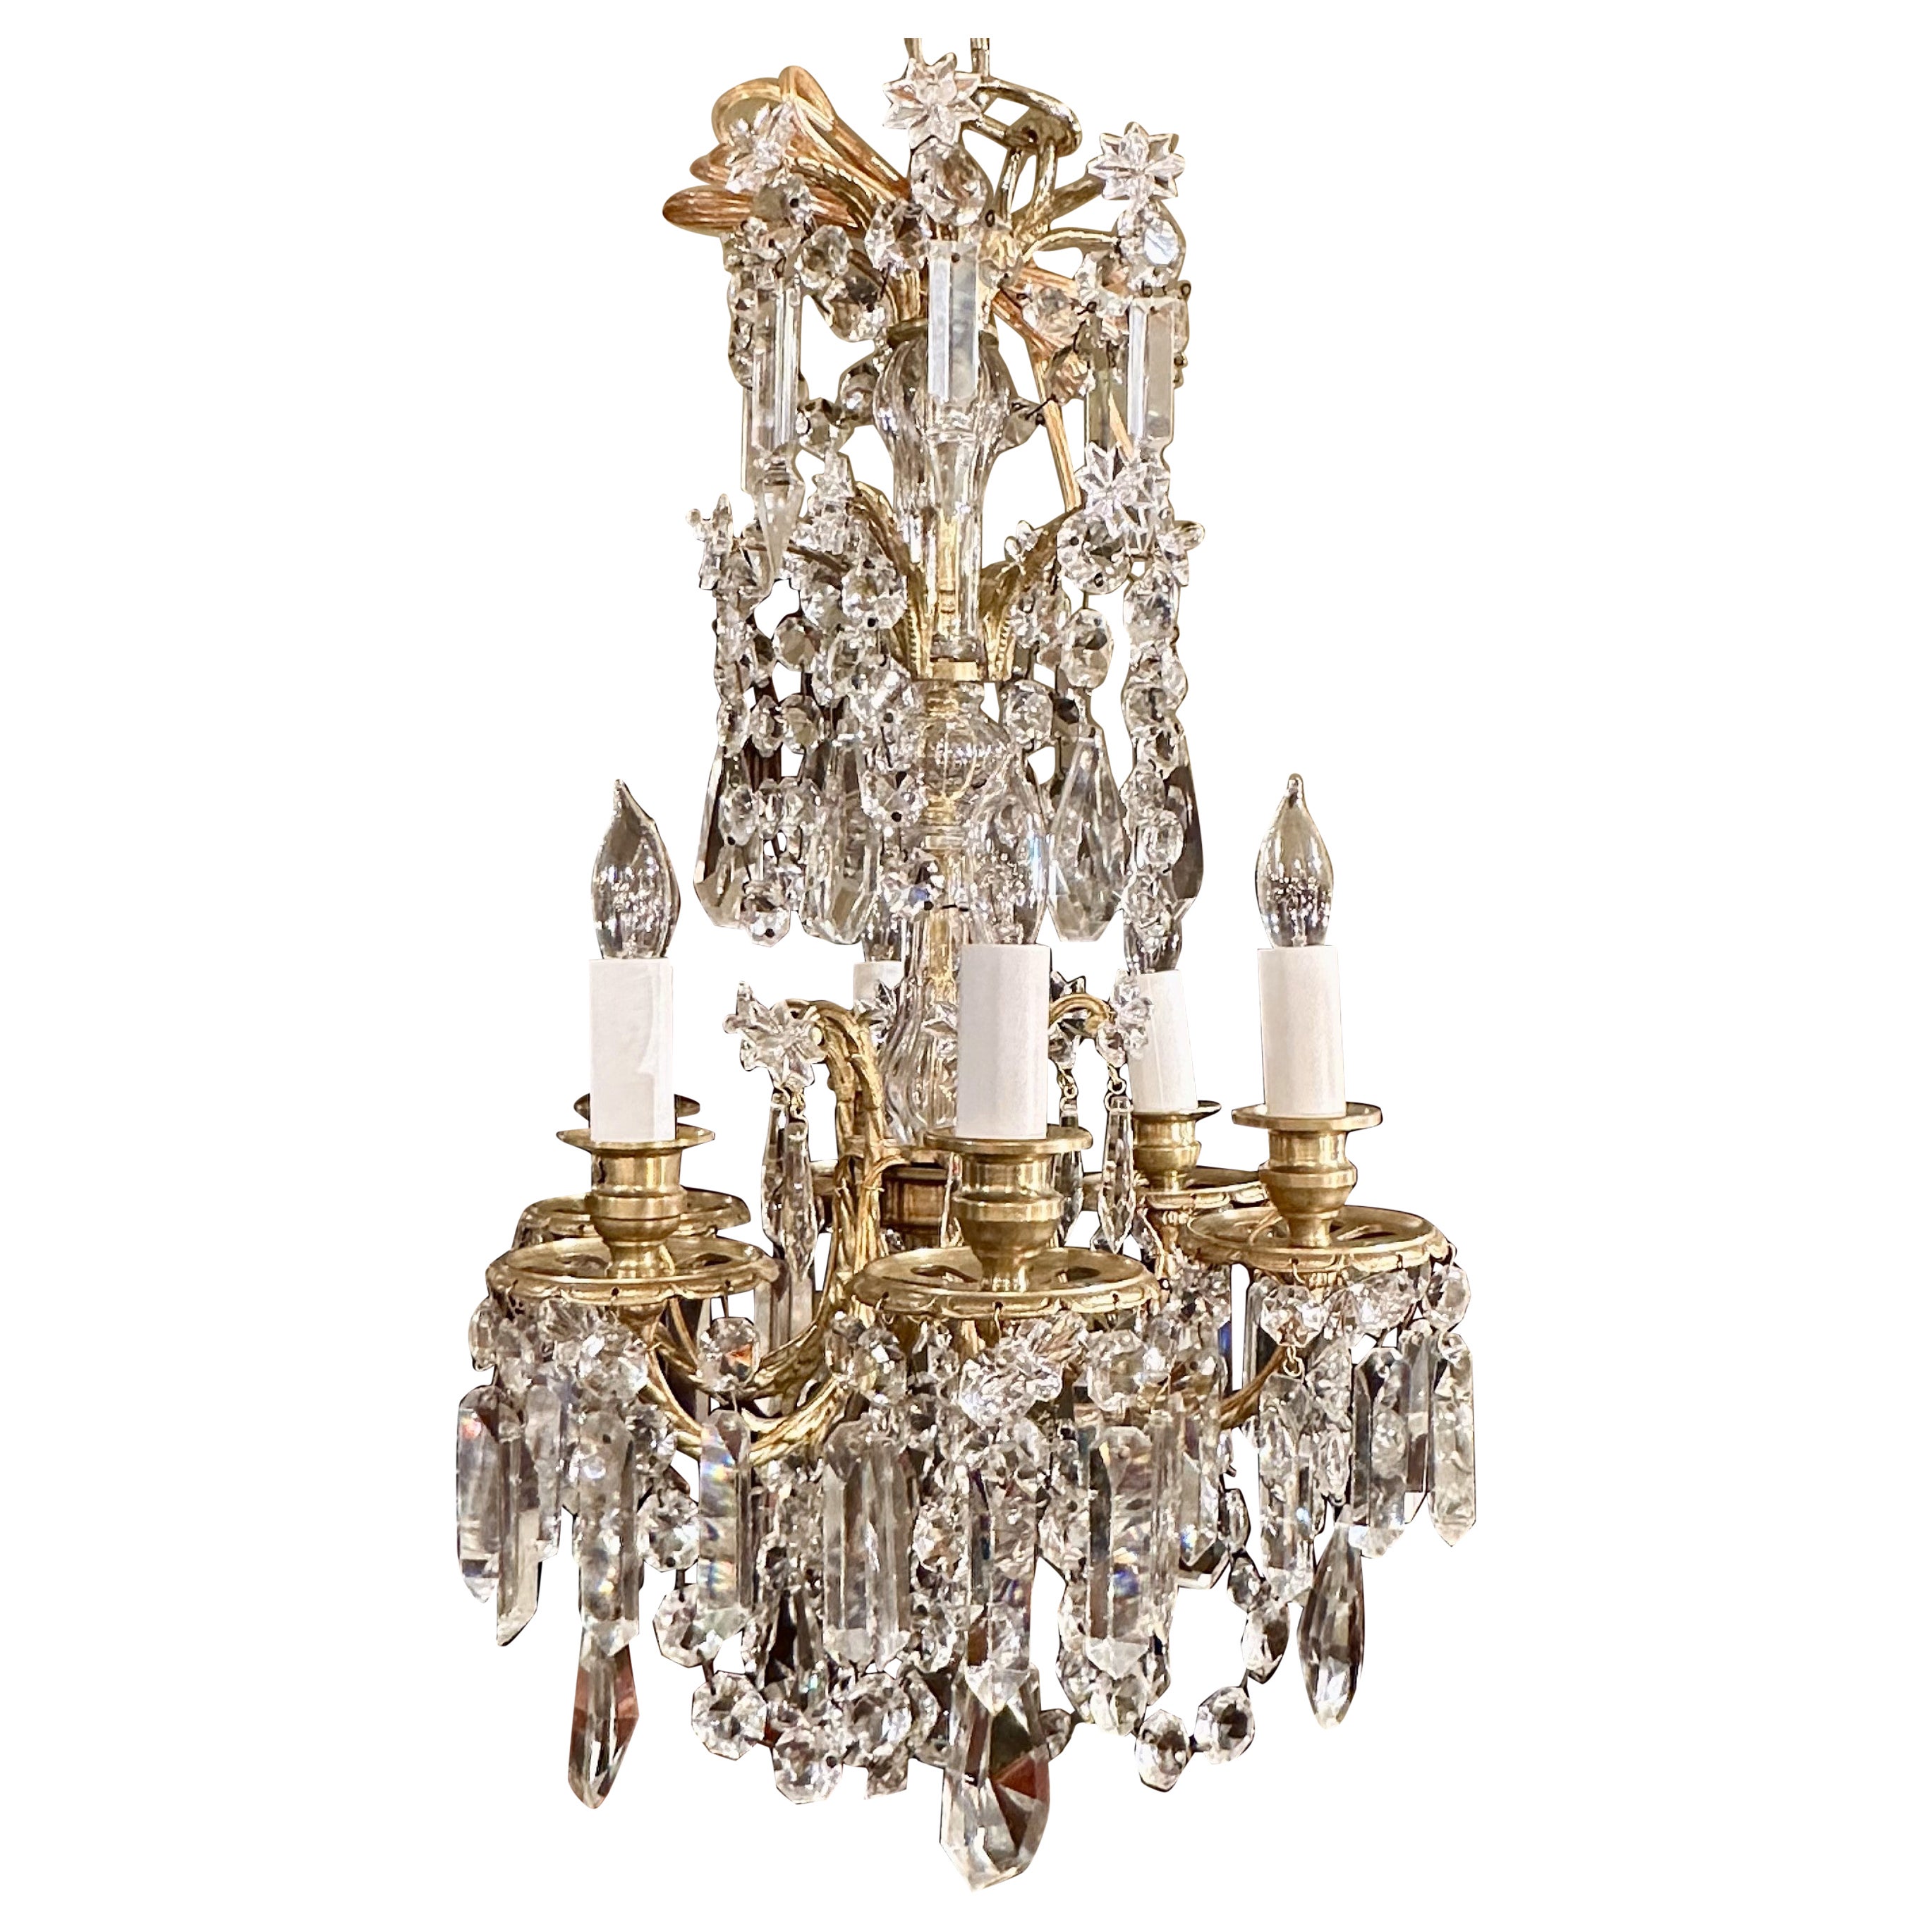 Antique French Napoleon III Gold Bronze & Cut Crystal Petite Chandelier Ca. 1885 For Sale